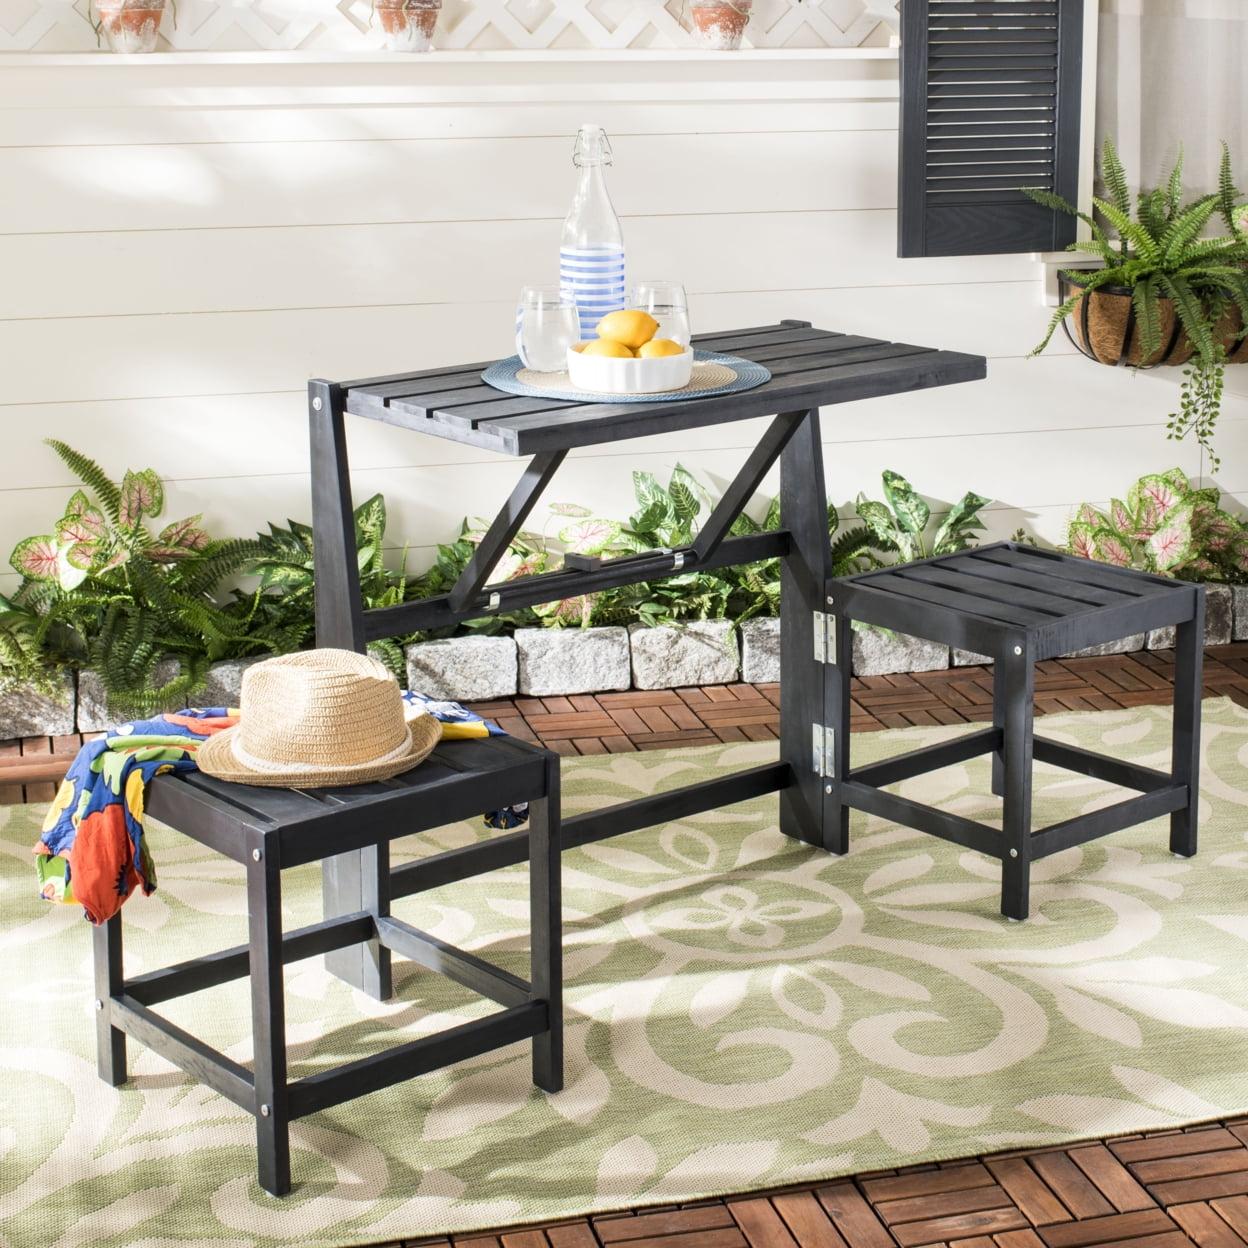 Belamy 63'' Black Transformer Bench-to-Table for Outdoor Use